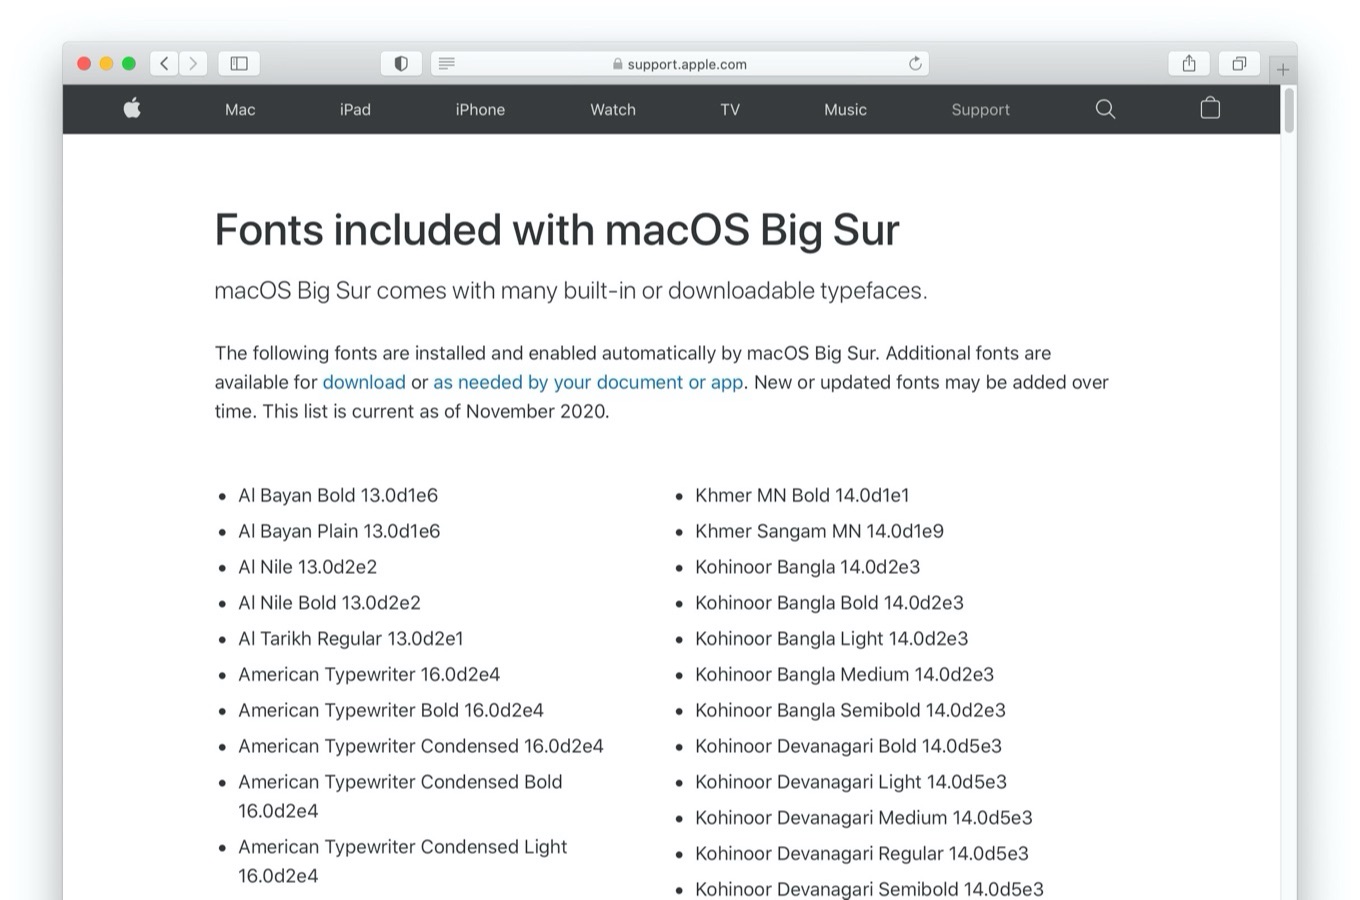 Fonts available for download in Big Sur